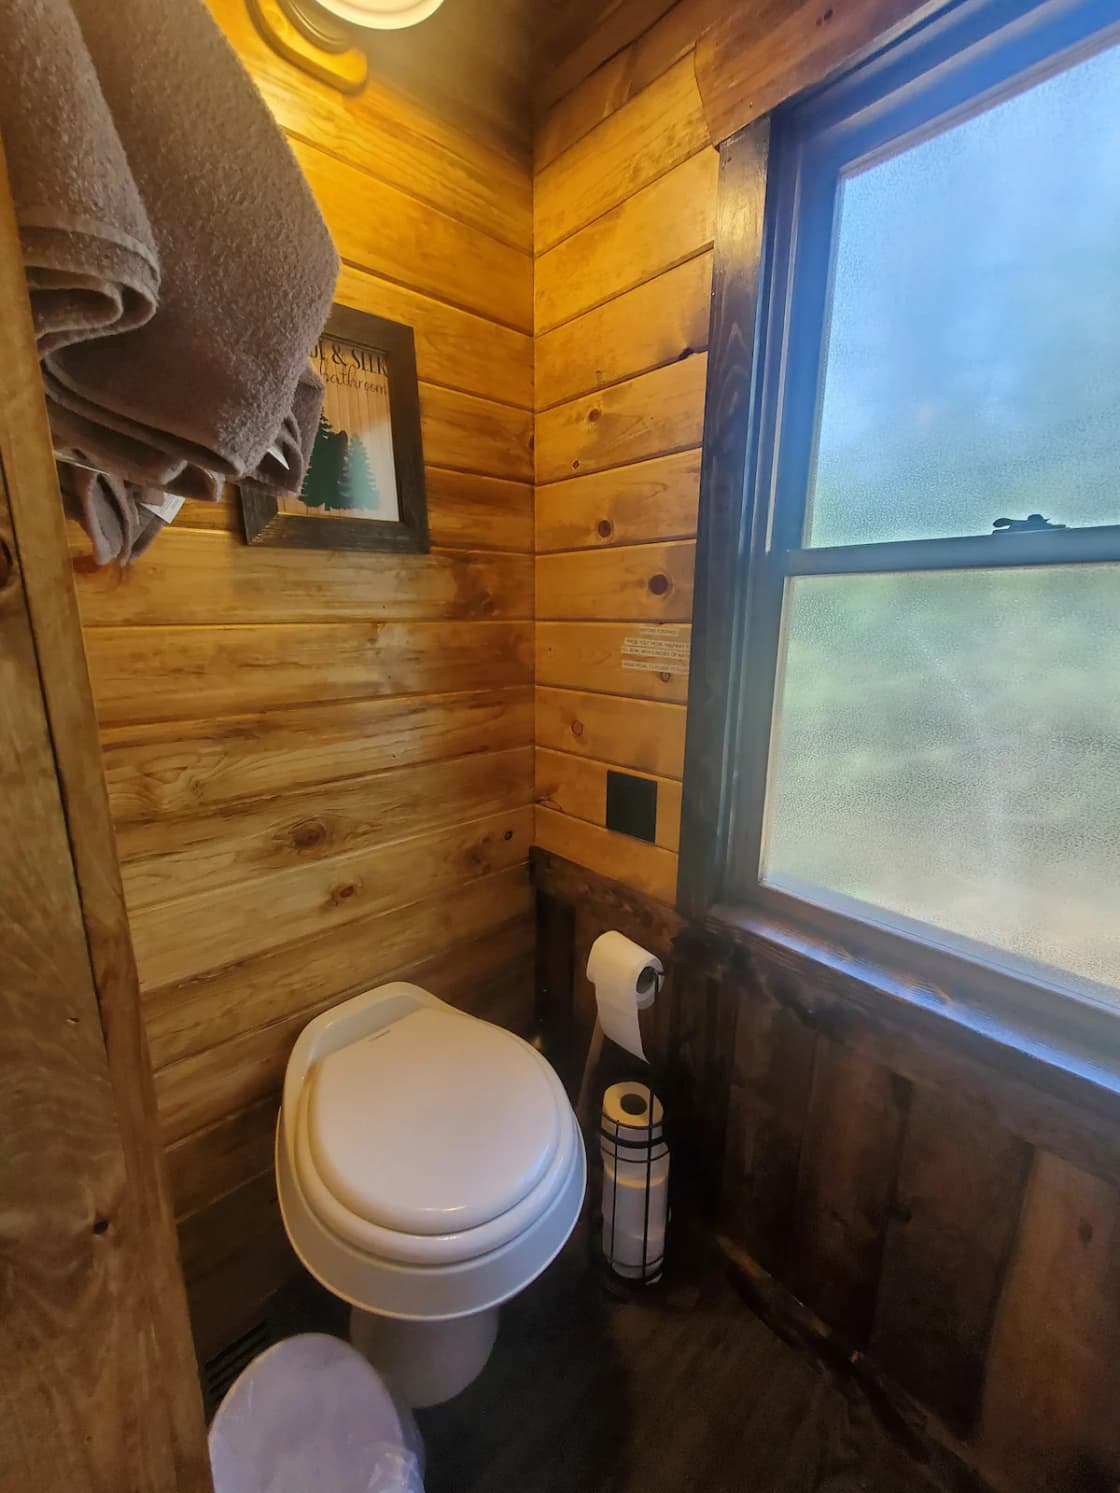 regular RV toilet, please fill with a little water before number 2